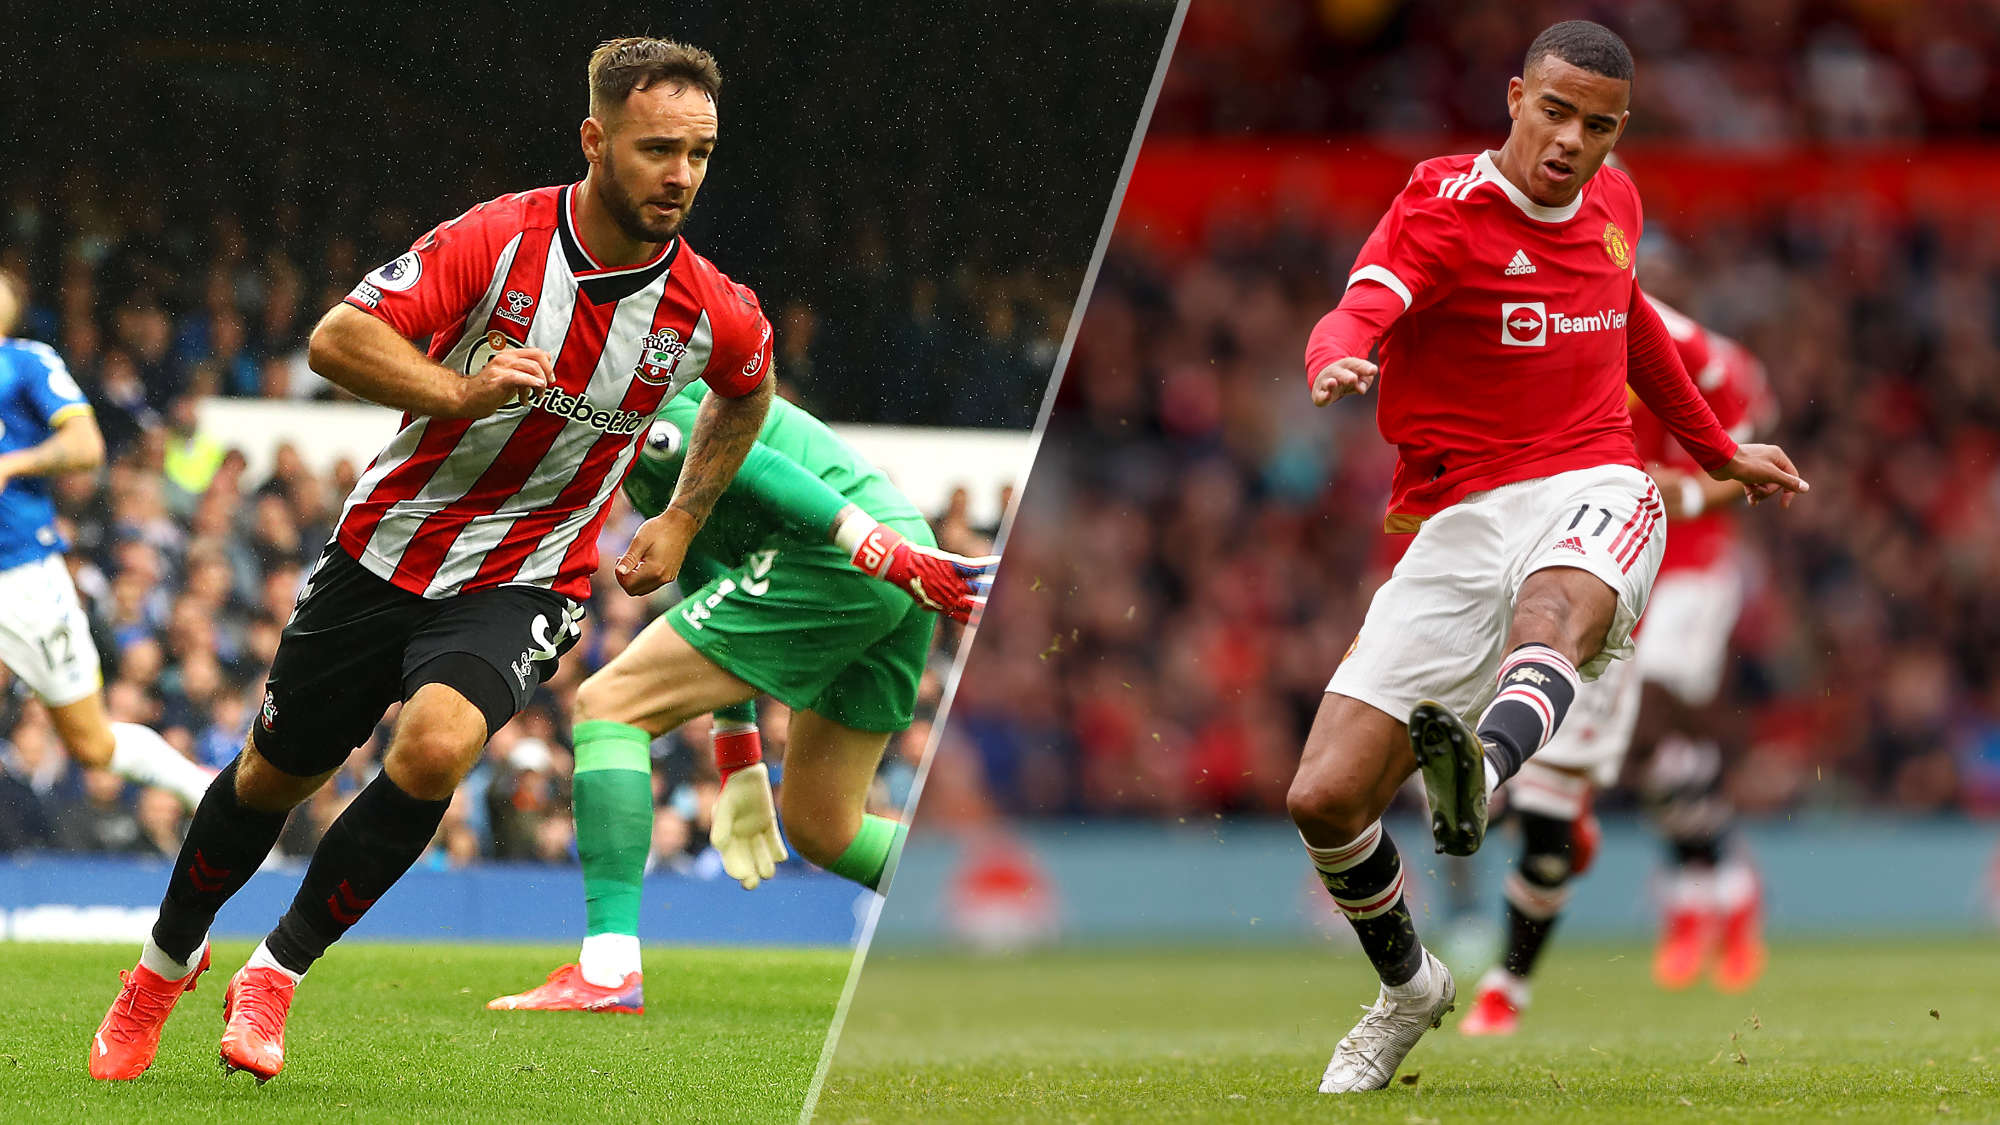 Southampton vs Manchester United live stream — how to watch Premier League  21/22 game online | Tom's Guide